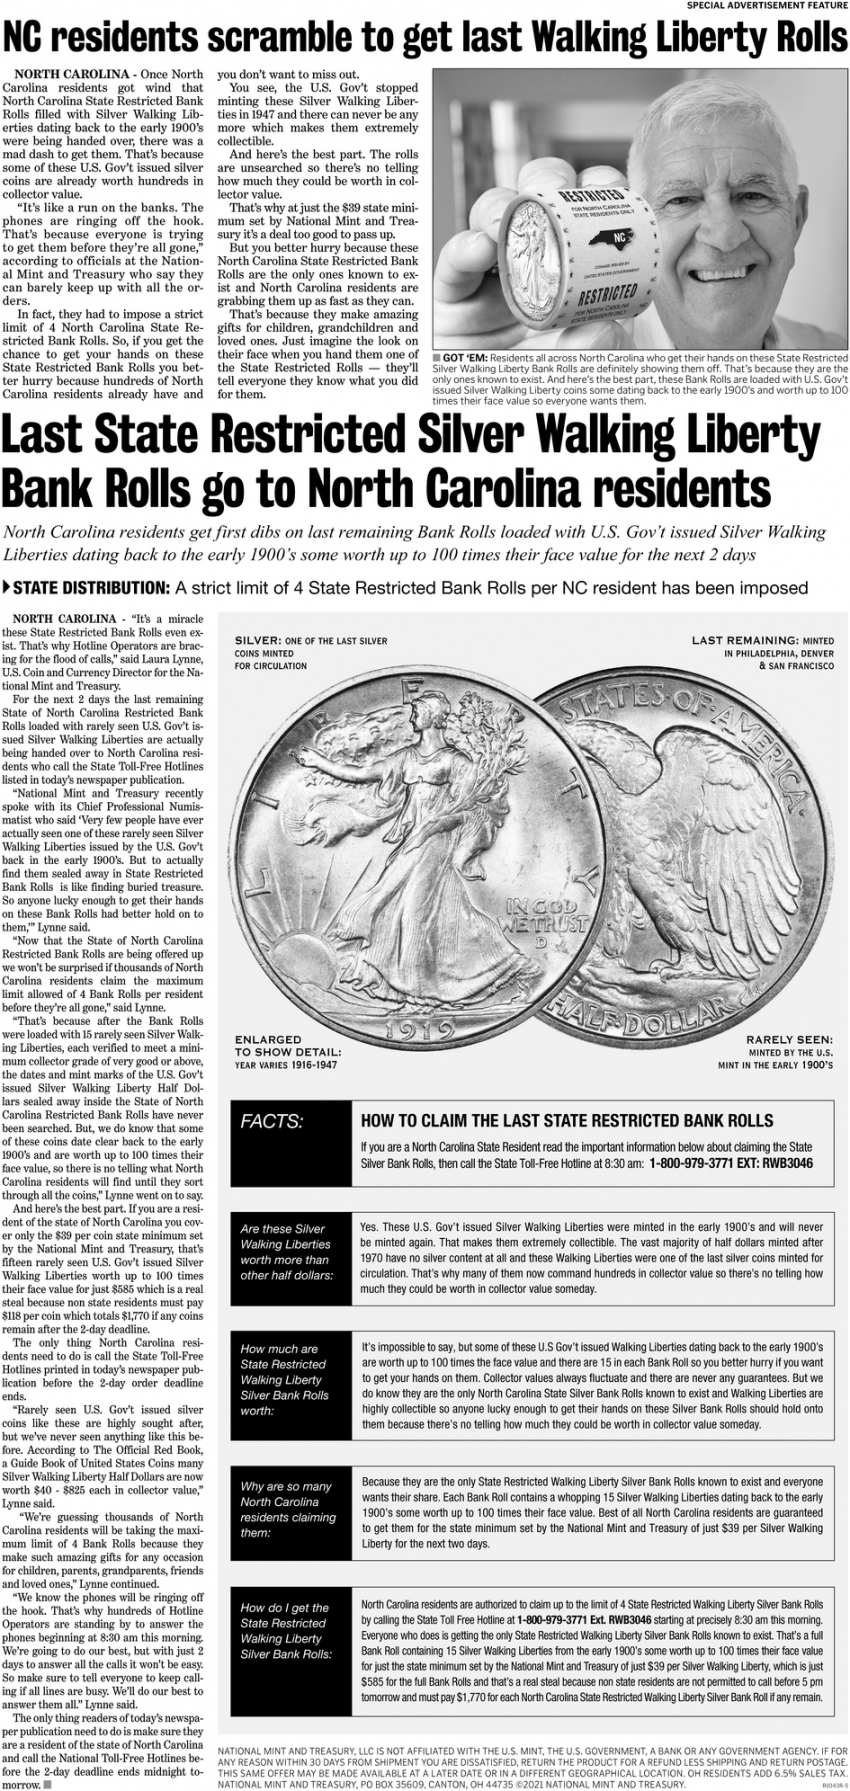 Last State Restricted Silver Walking Liberty Bank Rolls Go To North Carolina Residents